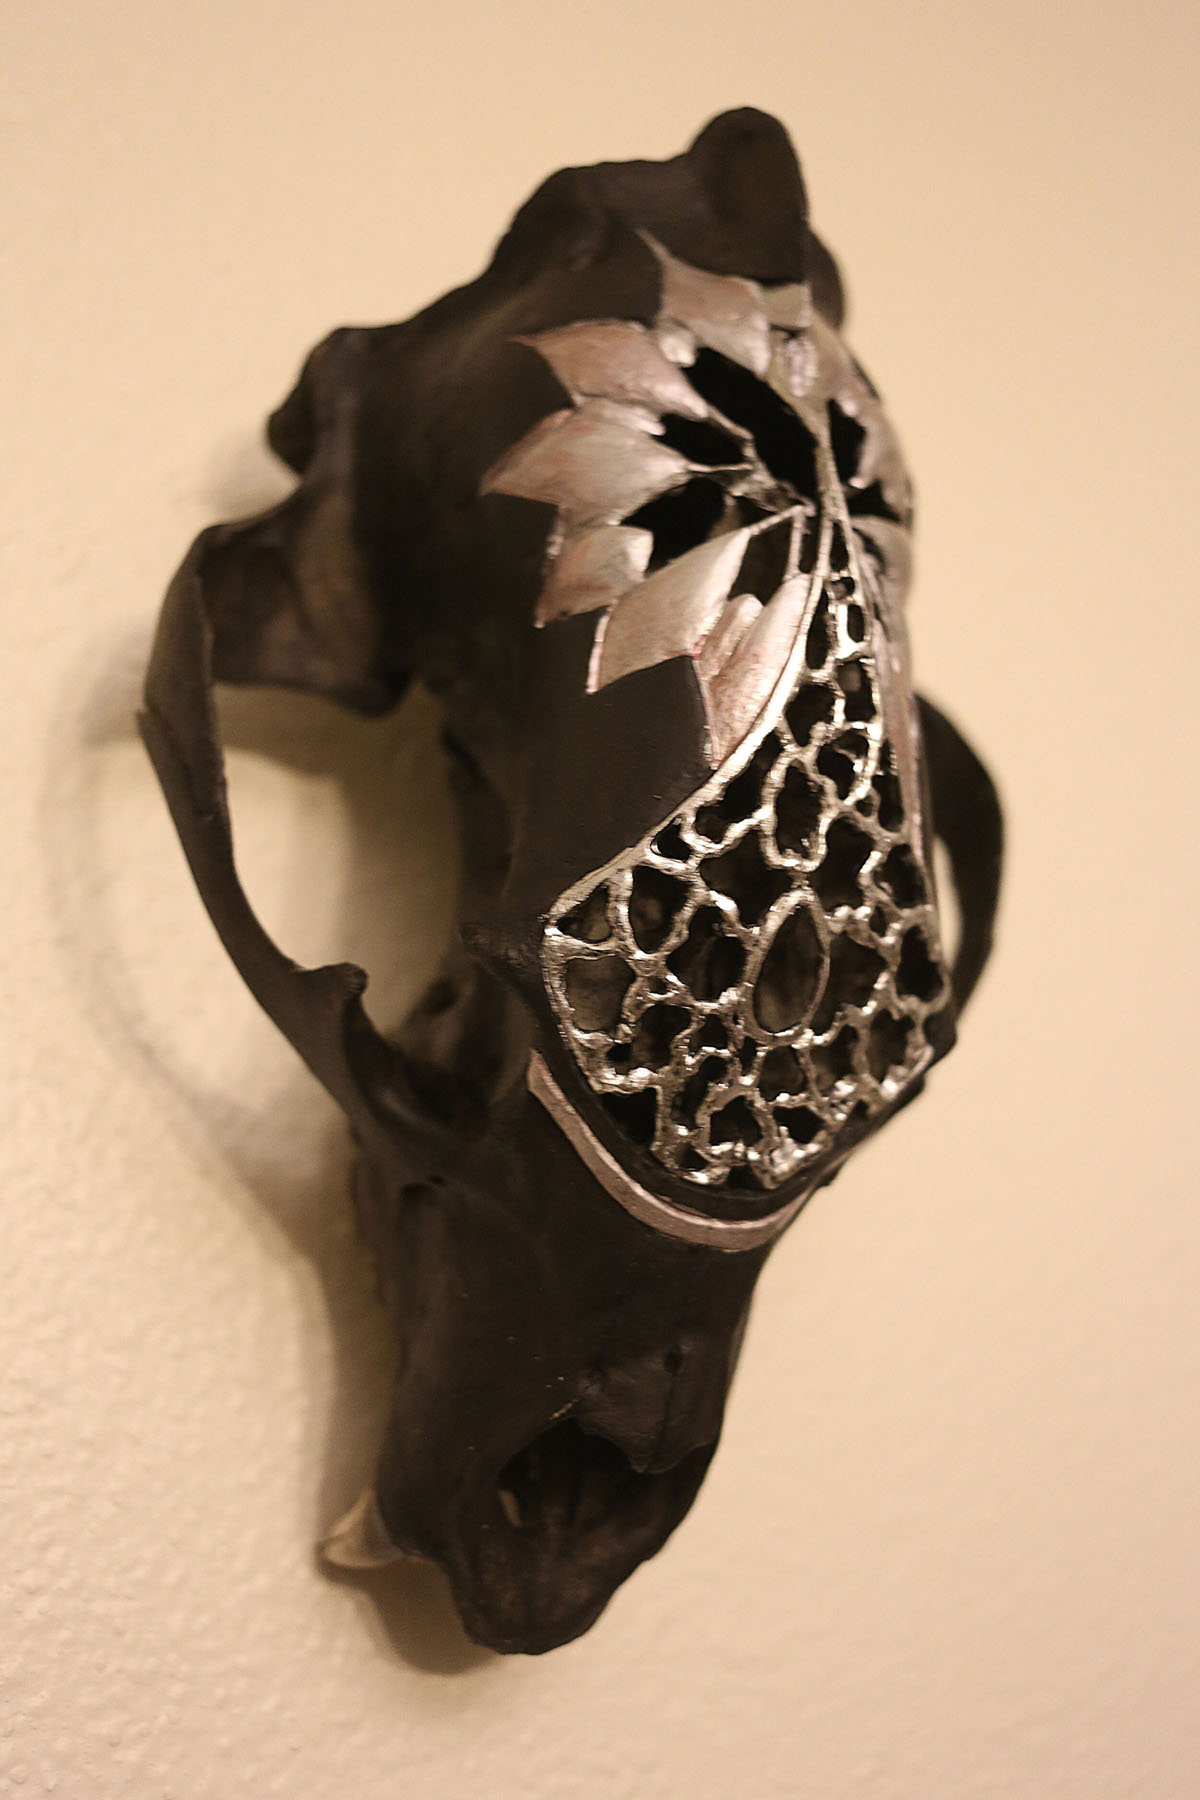 Carved bear skull painted with black and silver acrylic paint. Image courtesy of Indi Walter